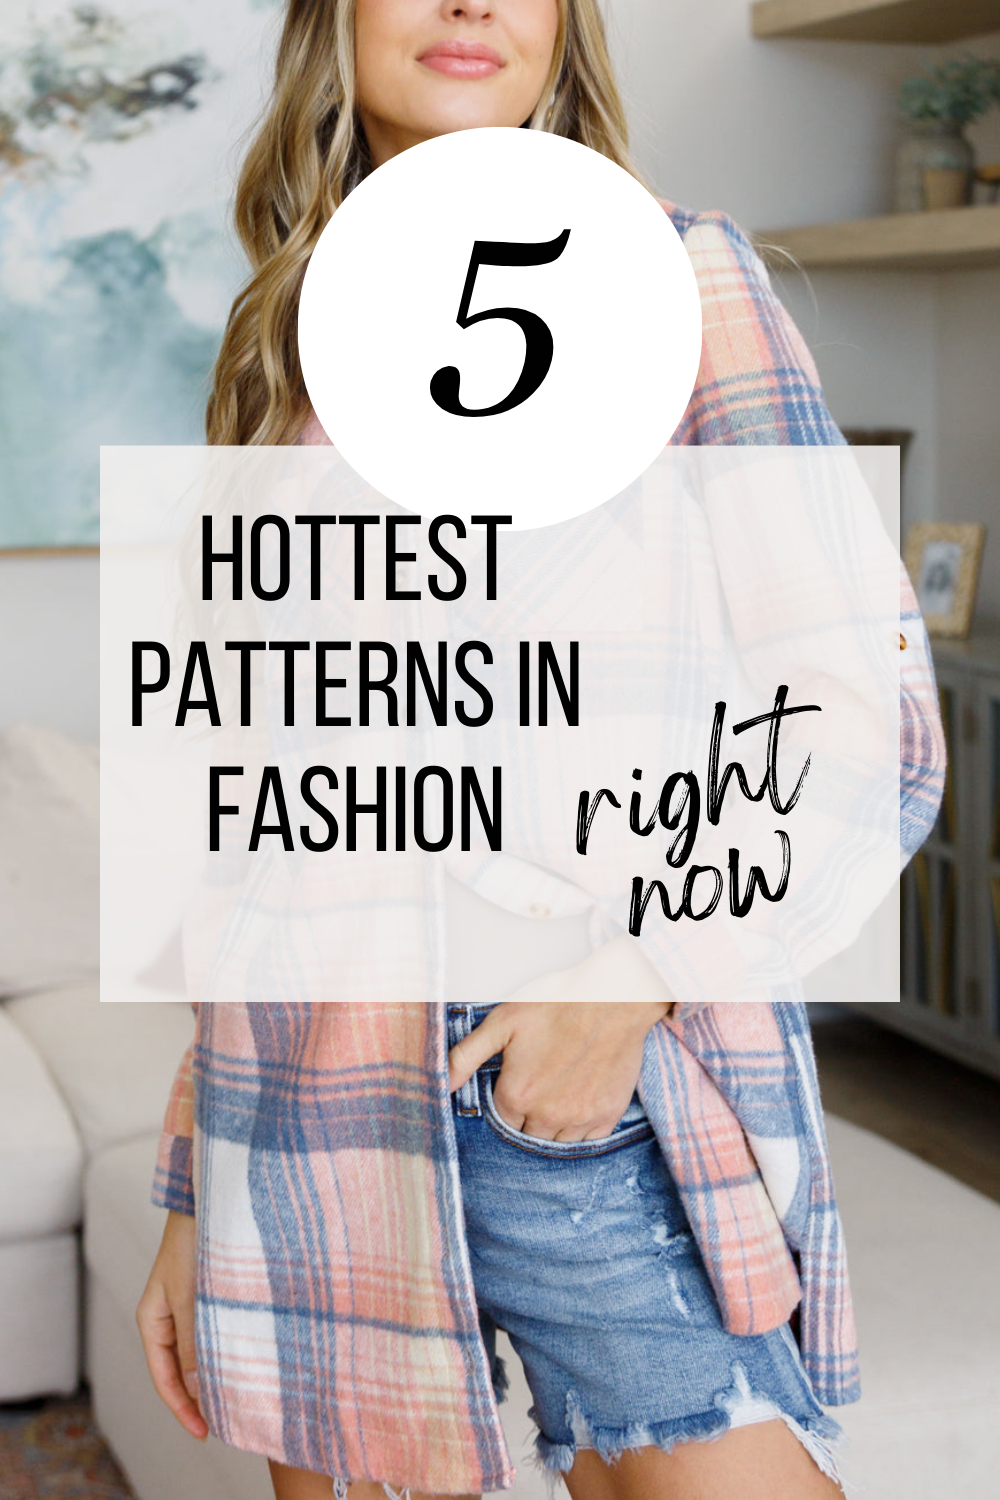 Trend Alert: The Hottest Patterns in Fashion Right Now!